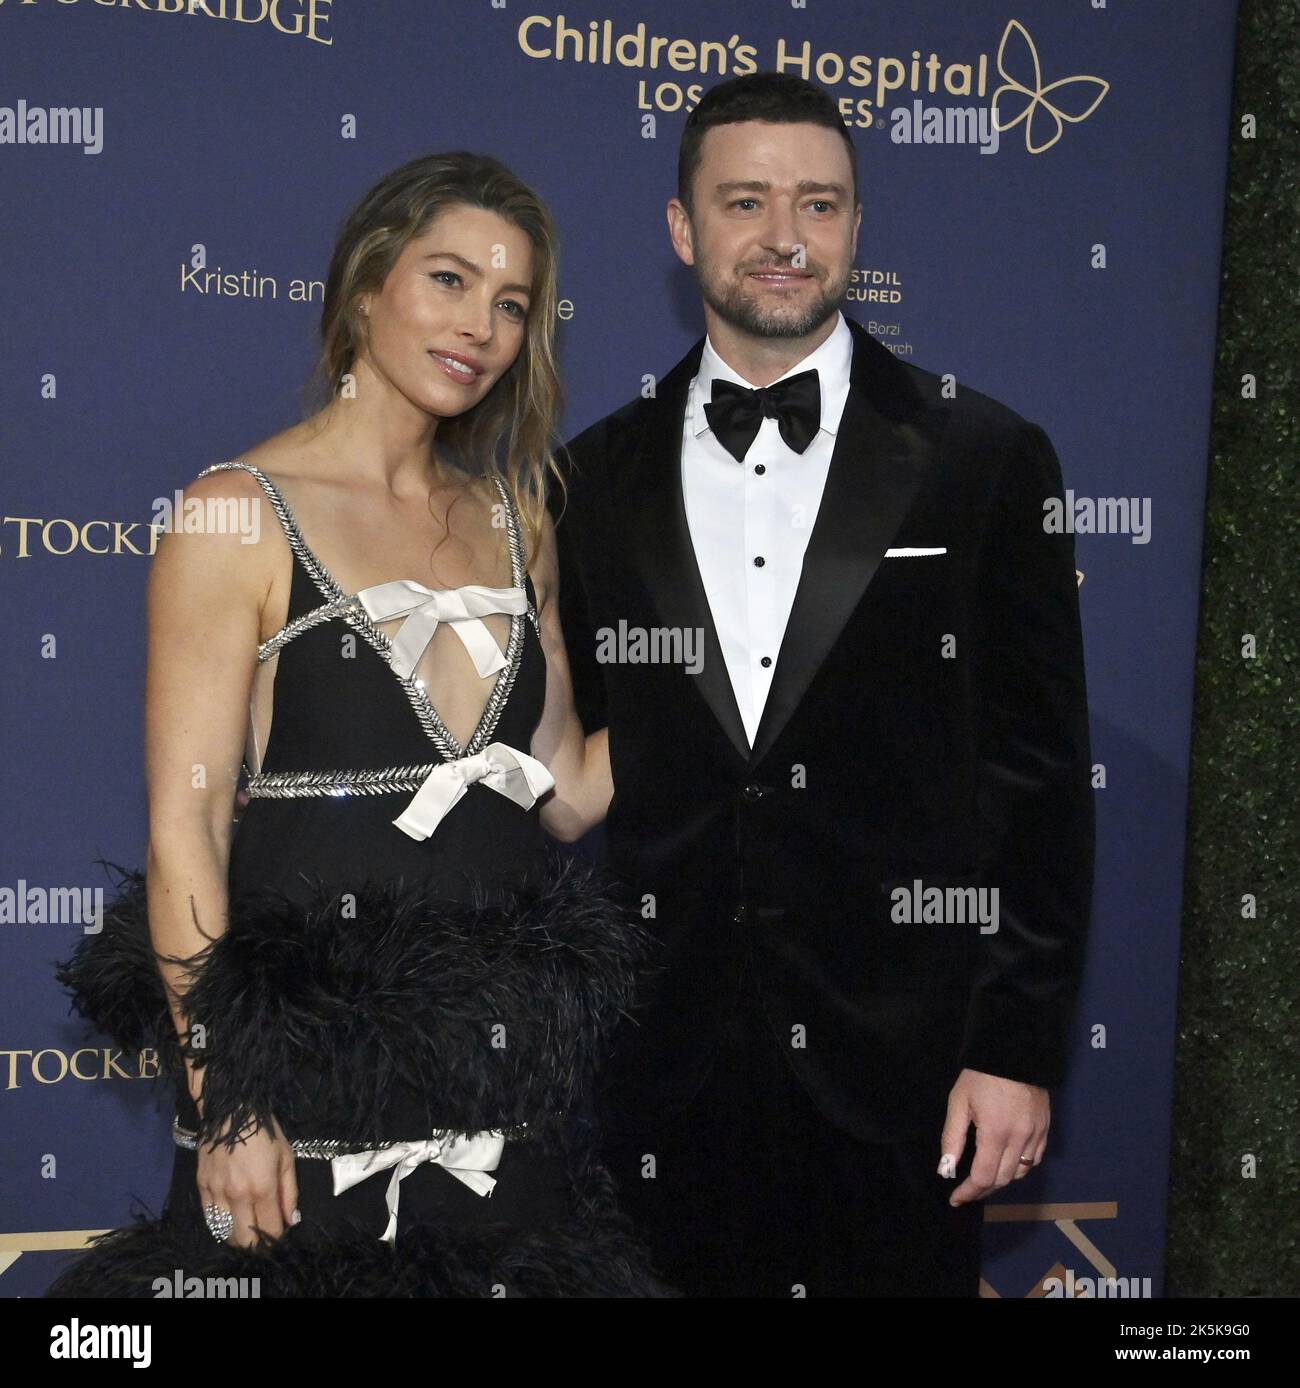 Los Angeles, United States. 08th Oct, 2022. Jessica Biel and Justin Timberlake attend the Children's Hospital Los Angeles CHLA gala at Barker Hangar in Santa Monica, California on Saturday, October 8, 2022. Hosted by actor Chris Pine and his father, actor Robert Pine, the evening featured a live performance by Timberlake and paid tribute to the hospital's frontline clinical team members and philanthropists who help CHLA fulfill its mission of creating hope and building healthier futures for children. Photo by Jim Ruymen/UPI Credit: UPI/Alamy Live News Stock Photo